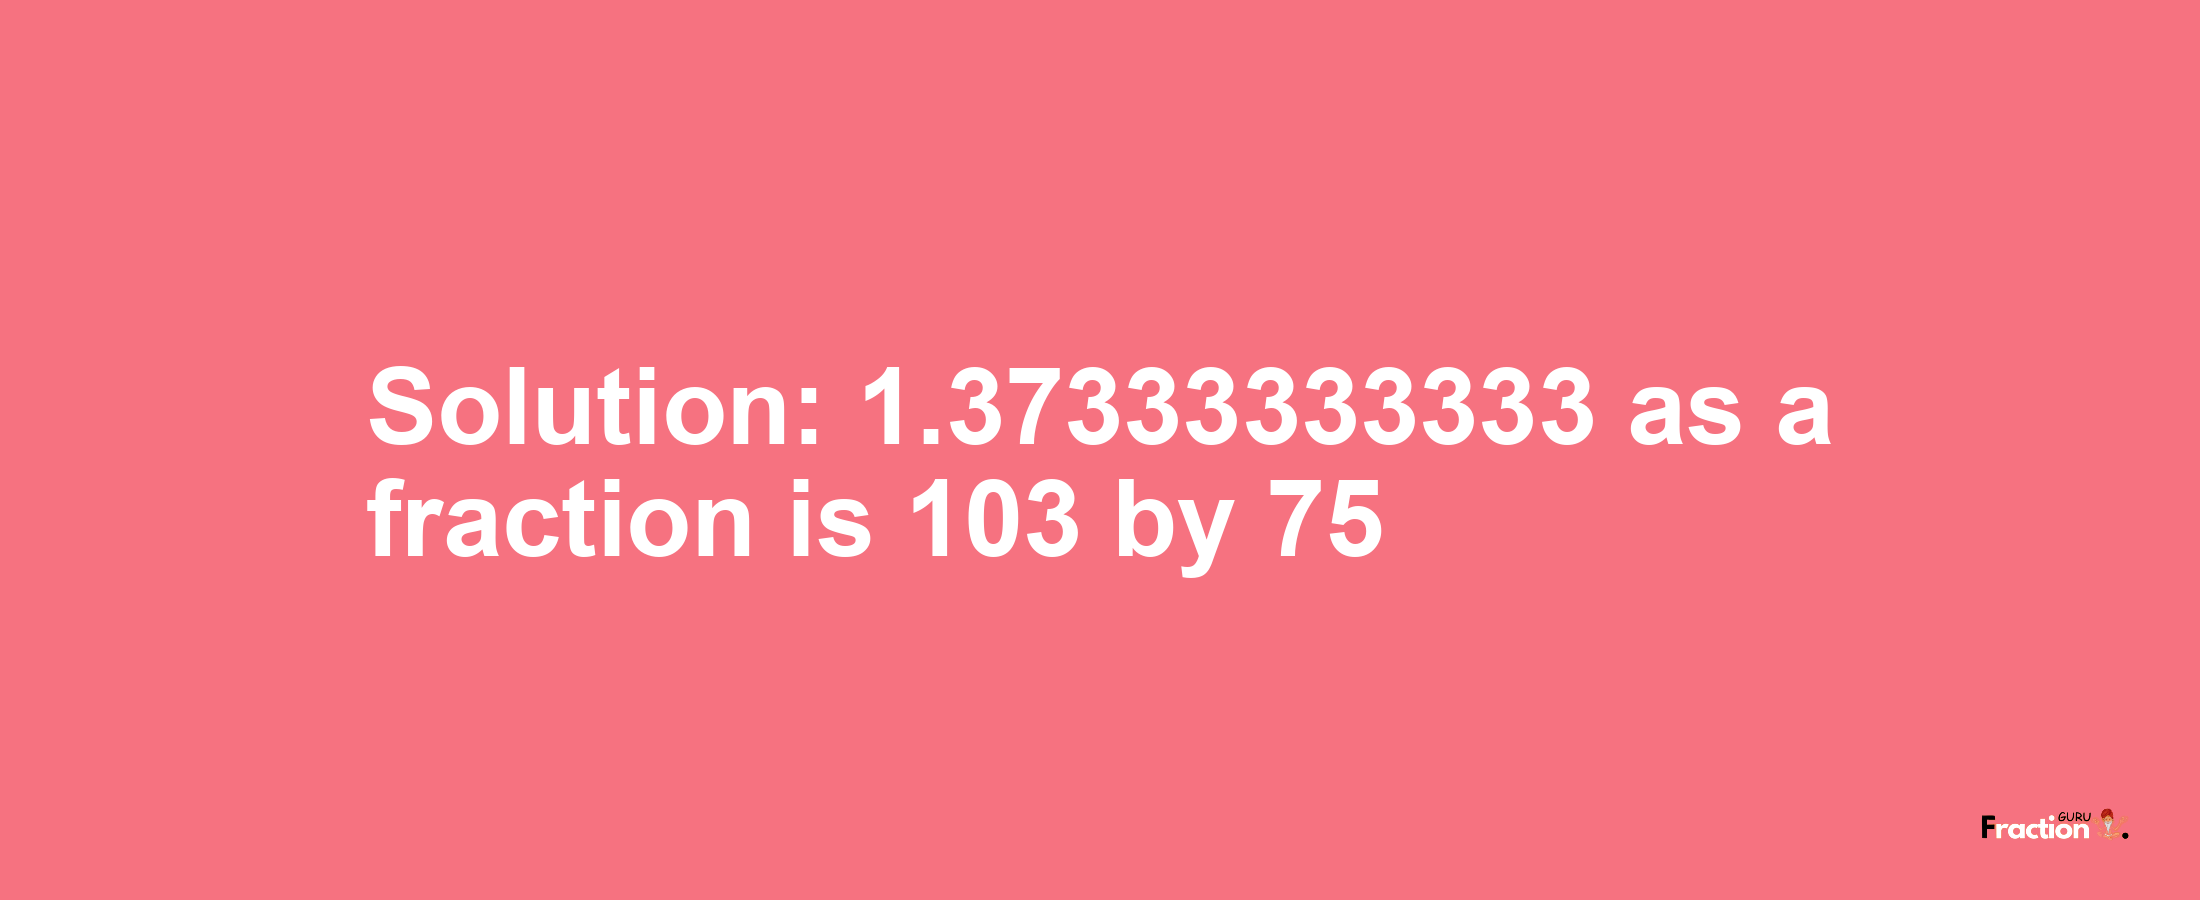 Solution:1.37333333333 as a fraction is 103/75